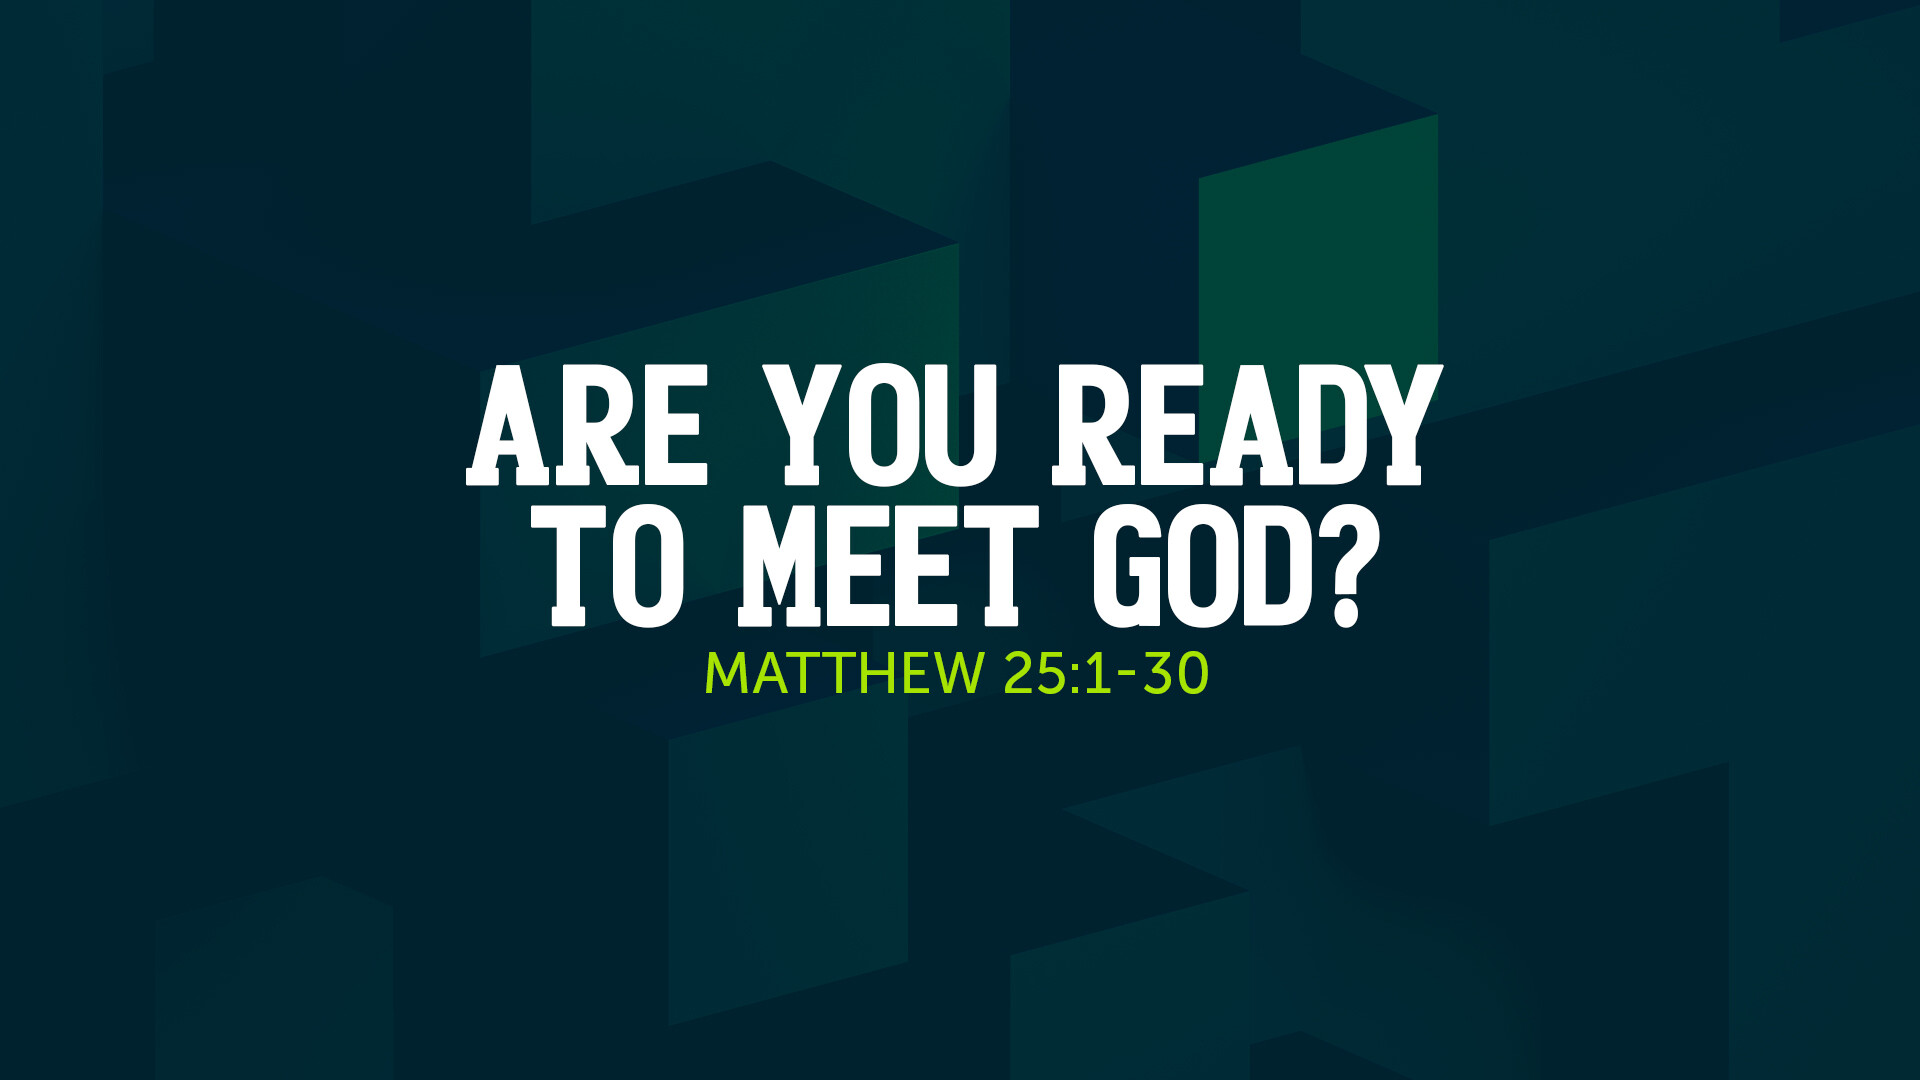 Are You Ready to Meet God?